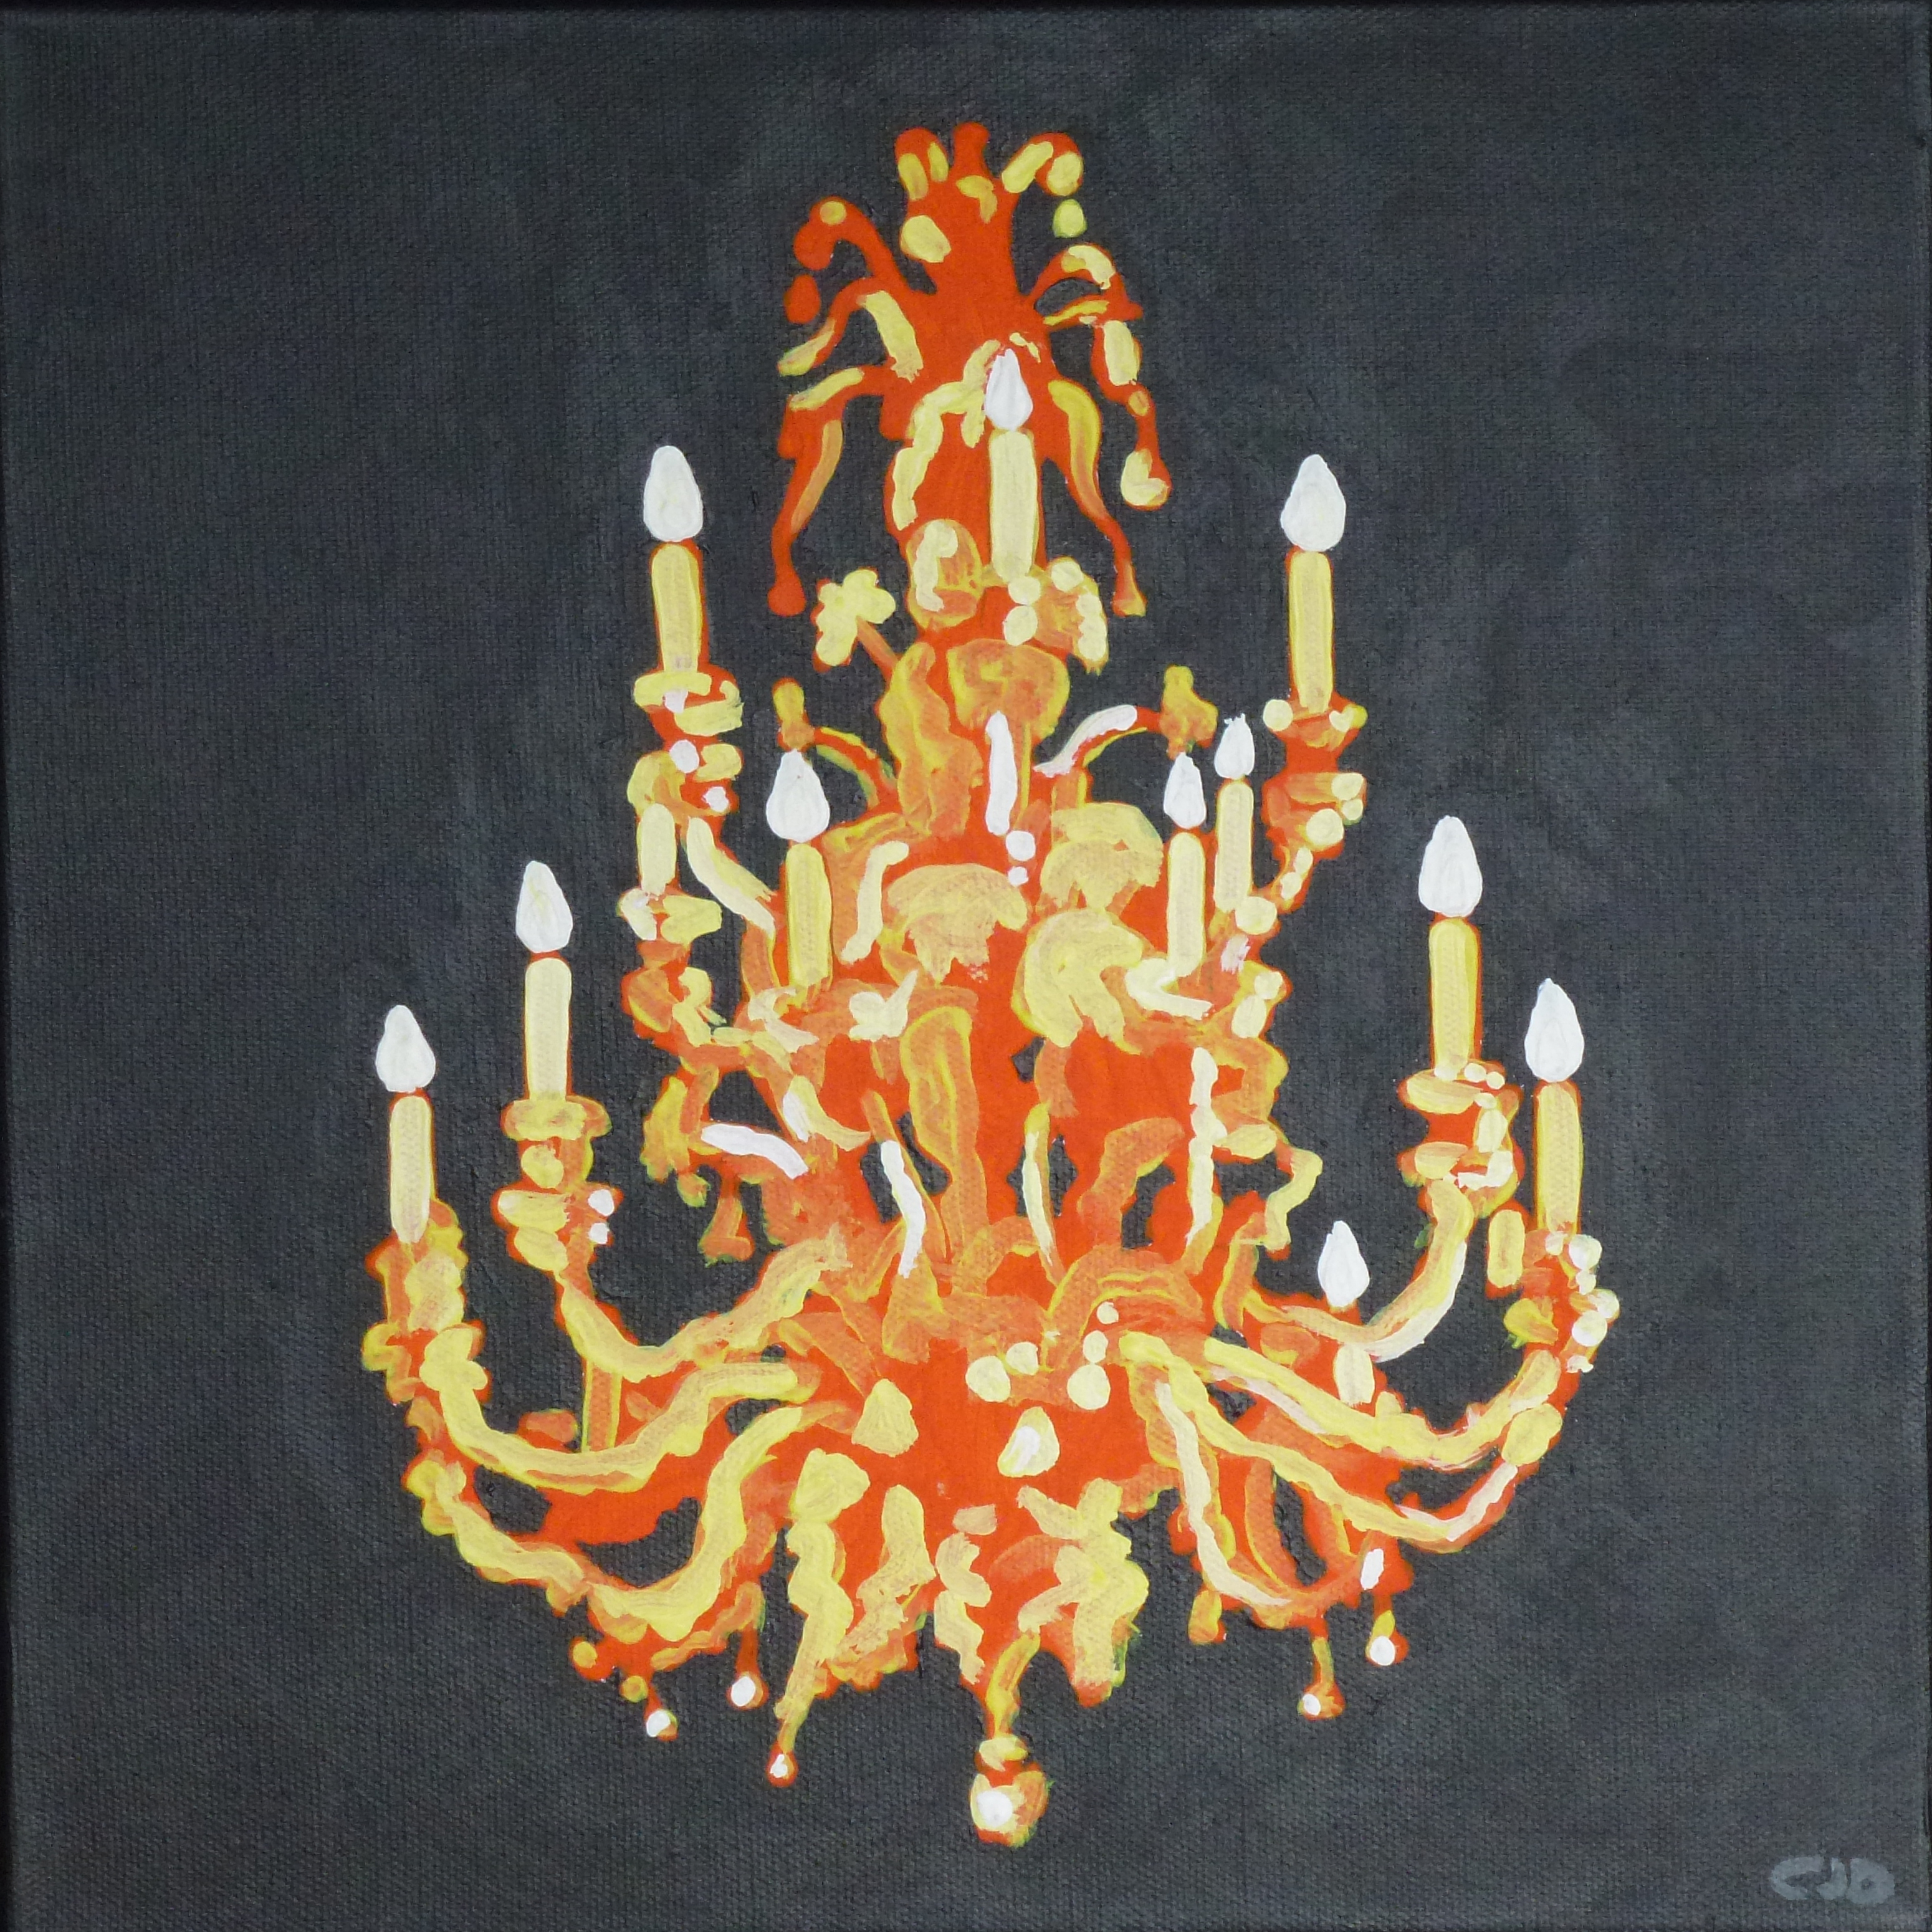 contemporary fine art acrylic painting of a chandelier on a black background by saatchiart artist Christian Dodd